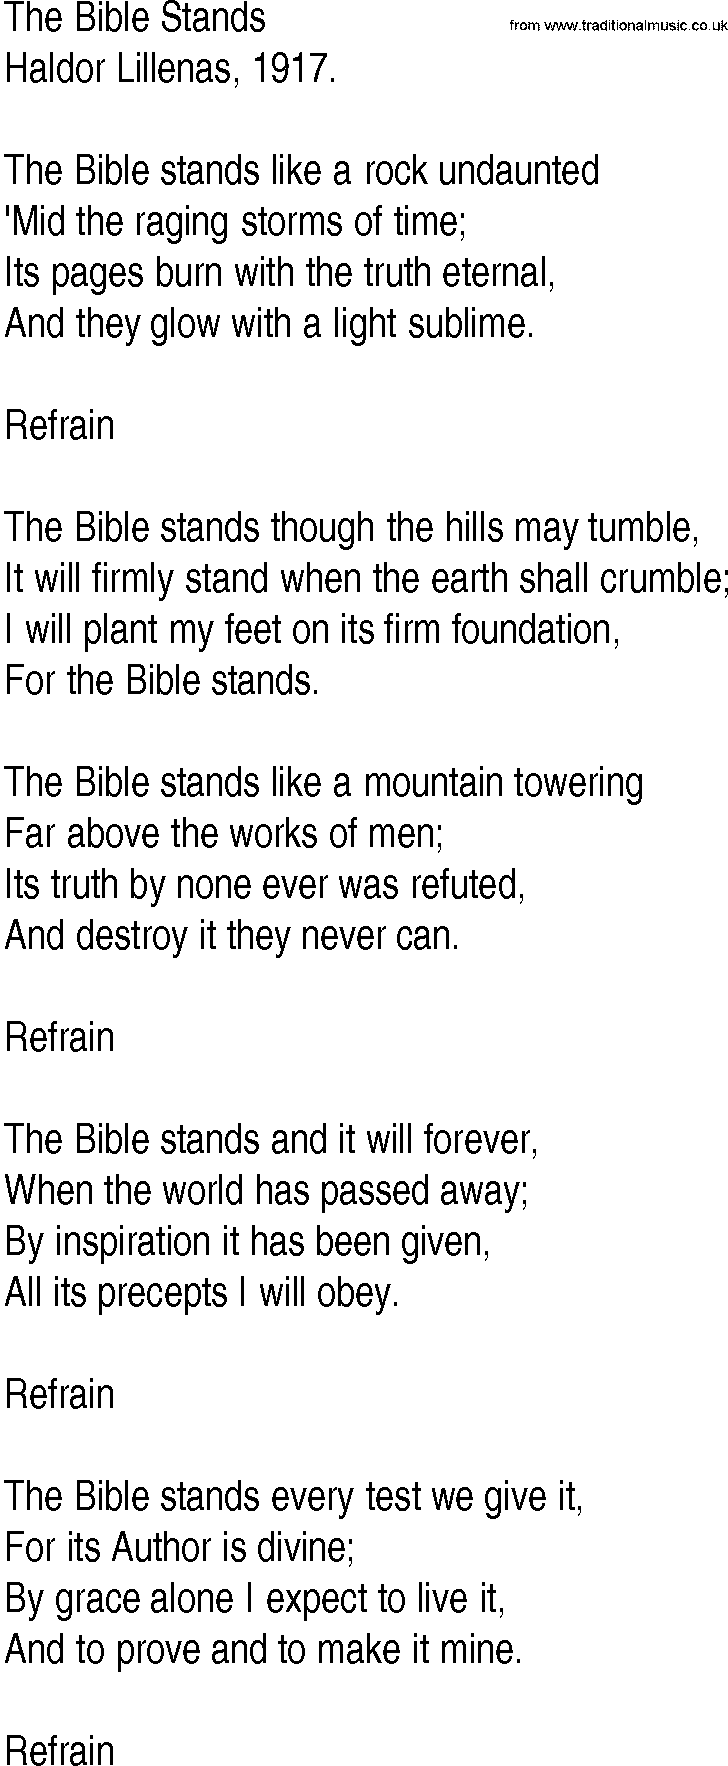 Hymn and Gospel Song: The Bible Stands by Haldor Lillenas lyrics